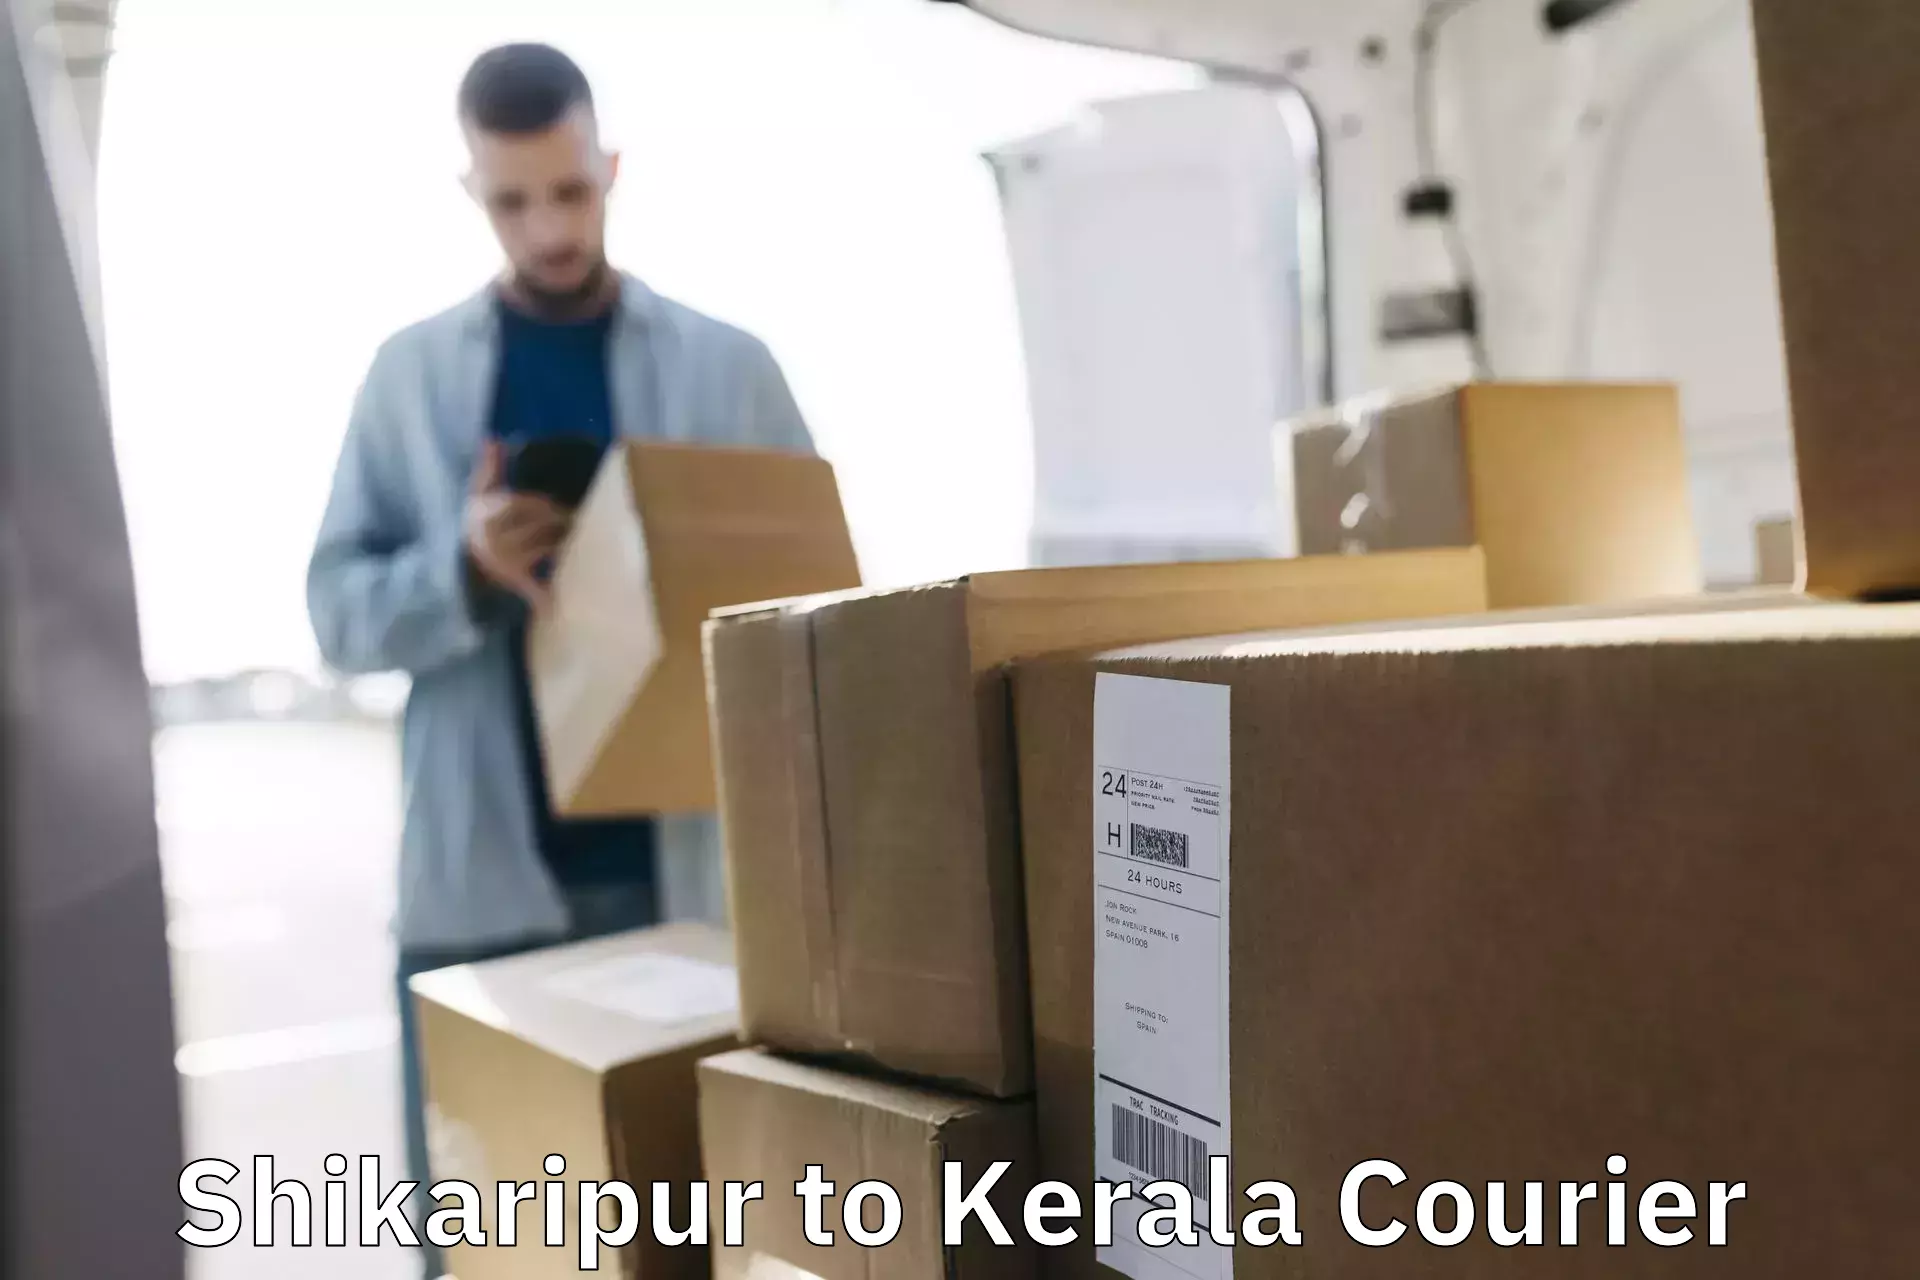 Express mail solutions in Shikaripur to Kerala